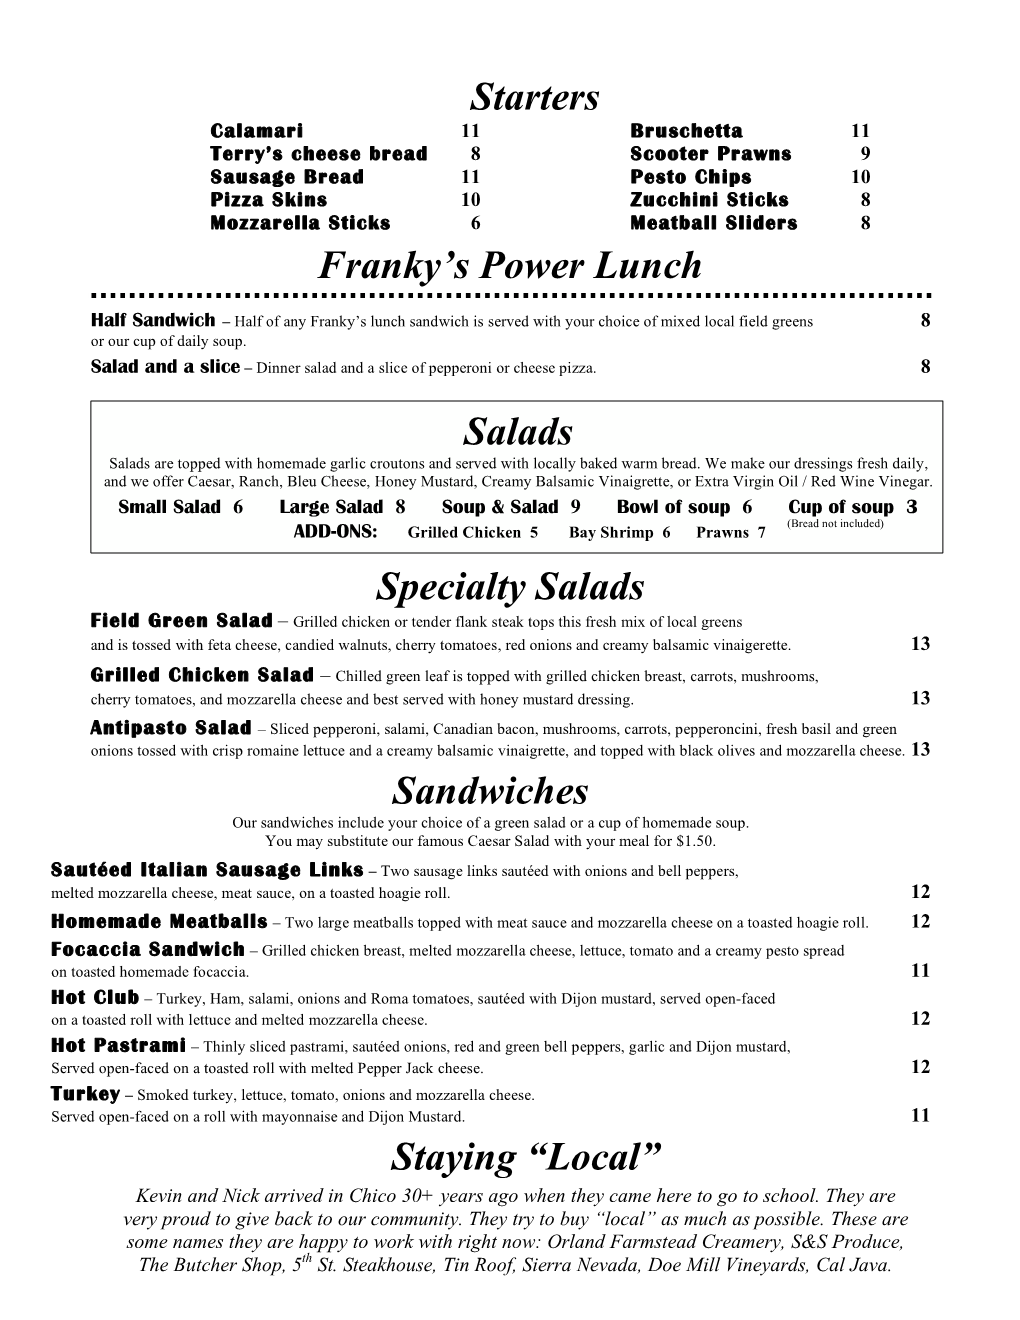 Starters Franky's Power Lunch Specialty Salads Sandwiches Staying